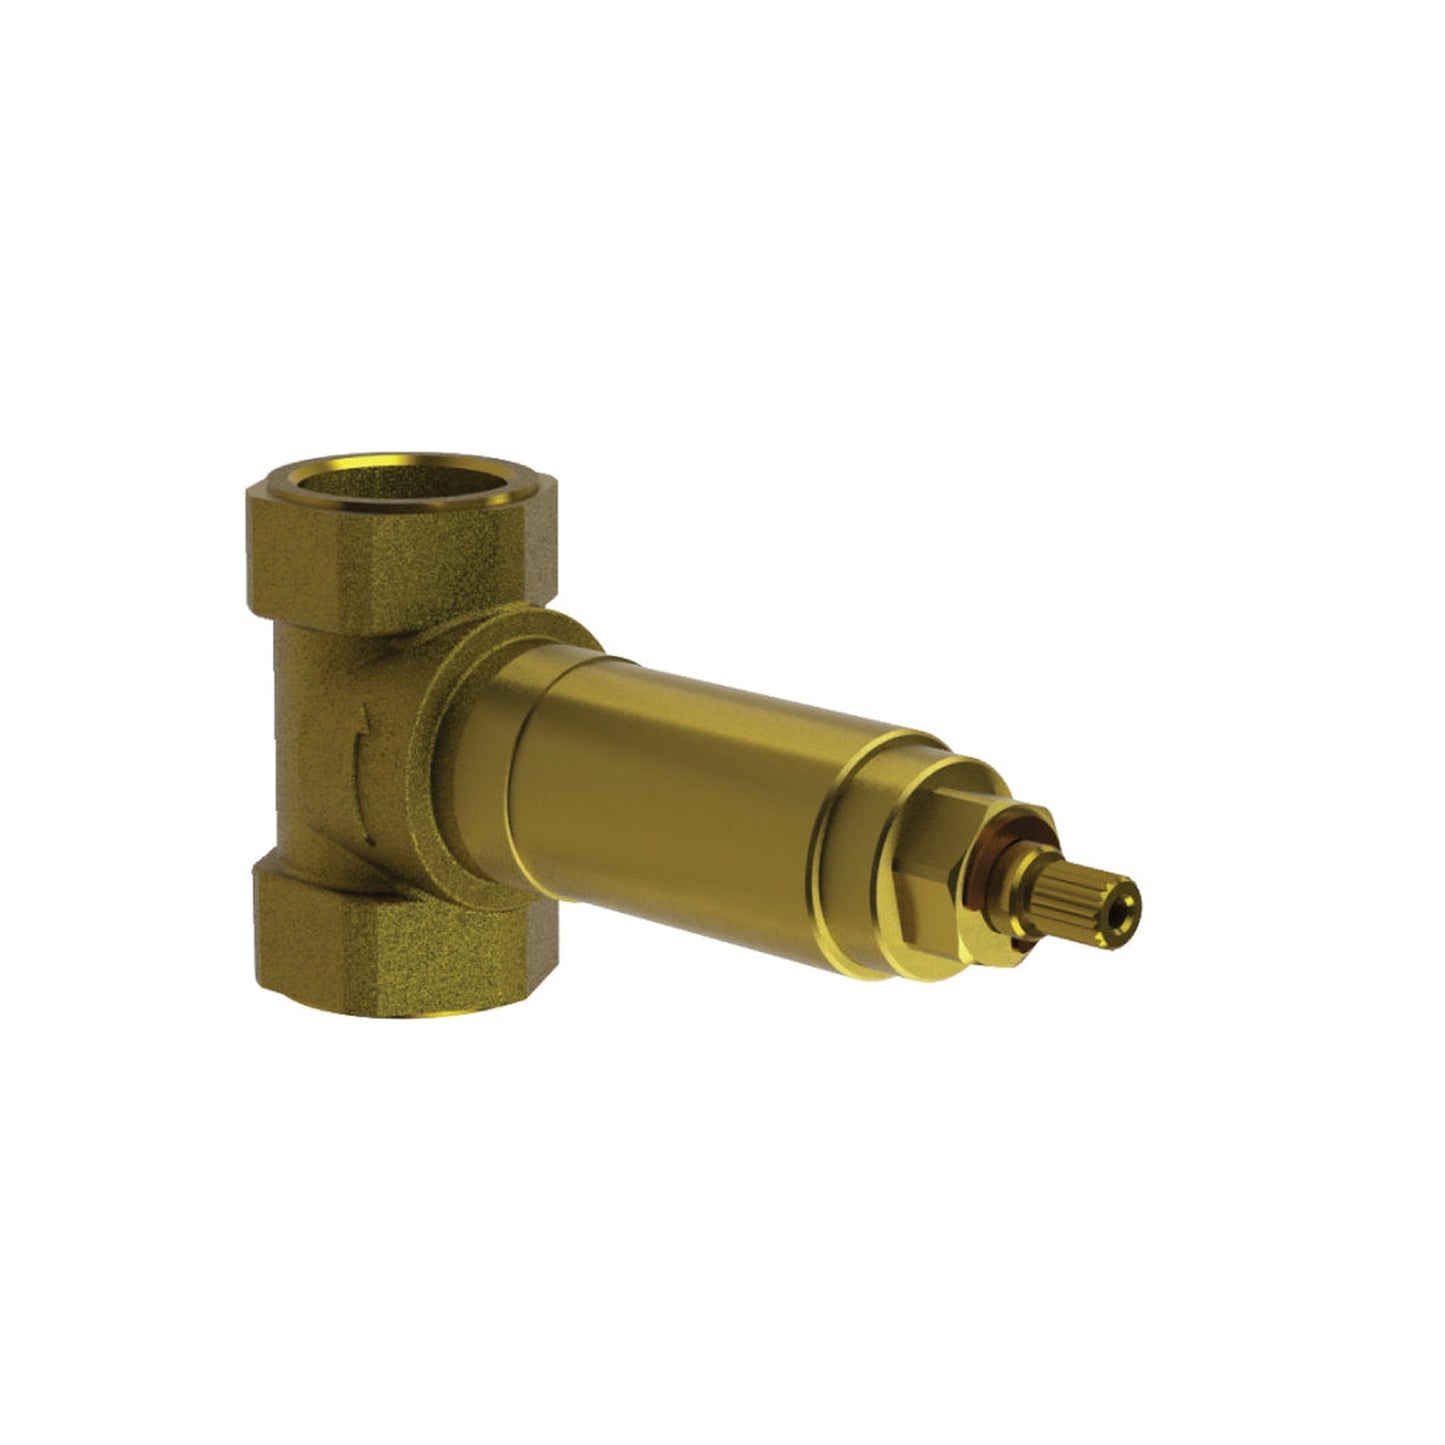 Isenberg Serie 260 3" Satin Brass PVD Wall Mounted Shower Faucet Trim With 0.75" Single-Output NPT Female Connection Volume Control Valve